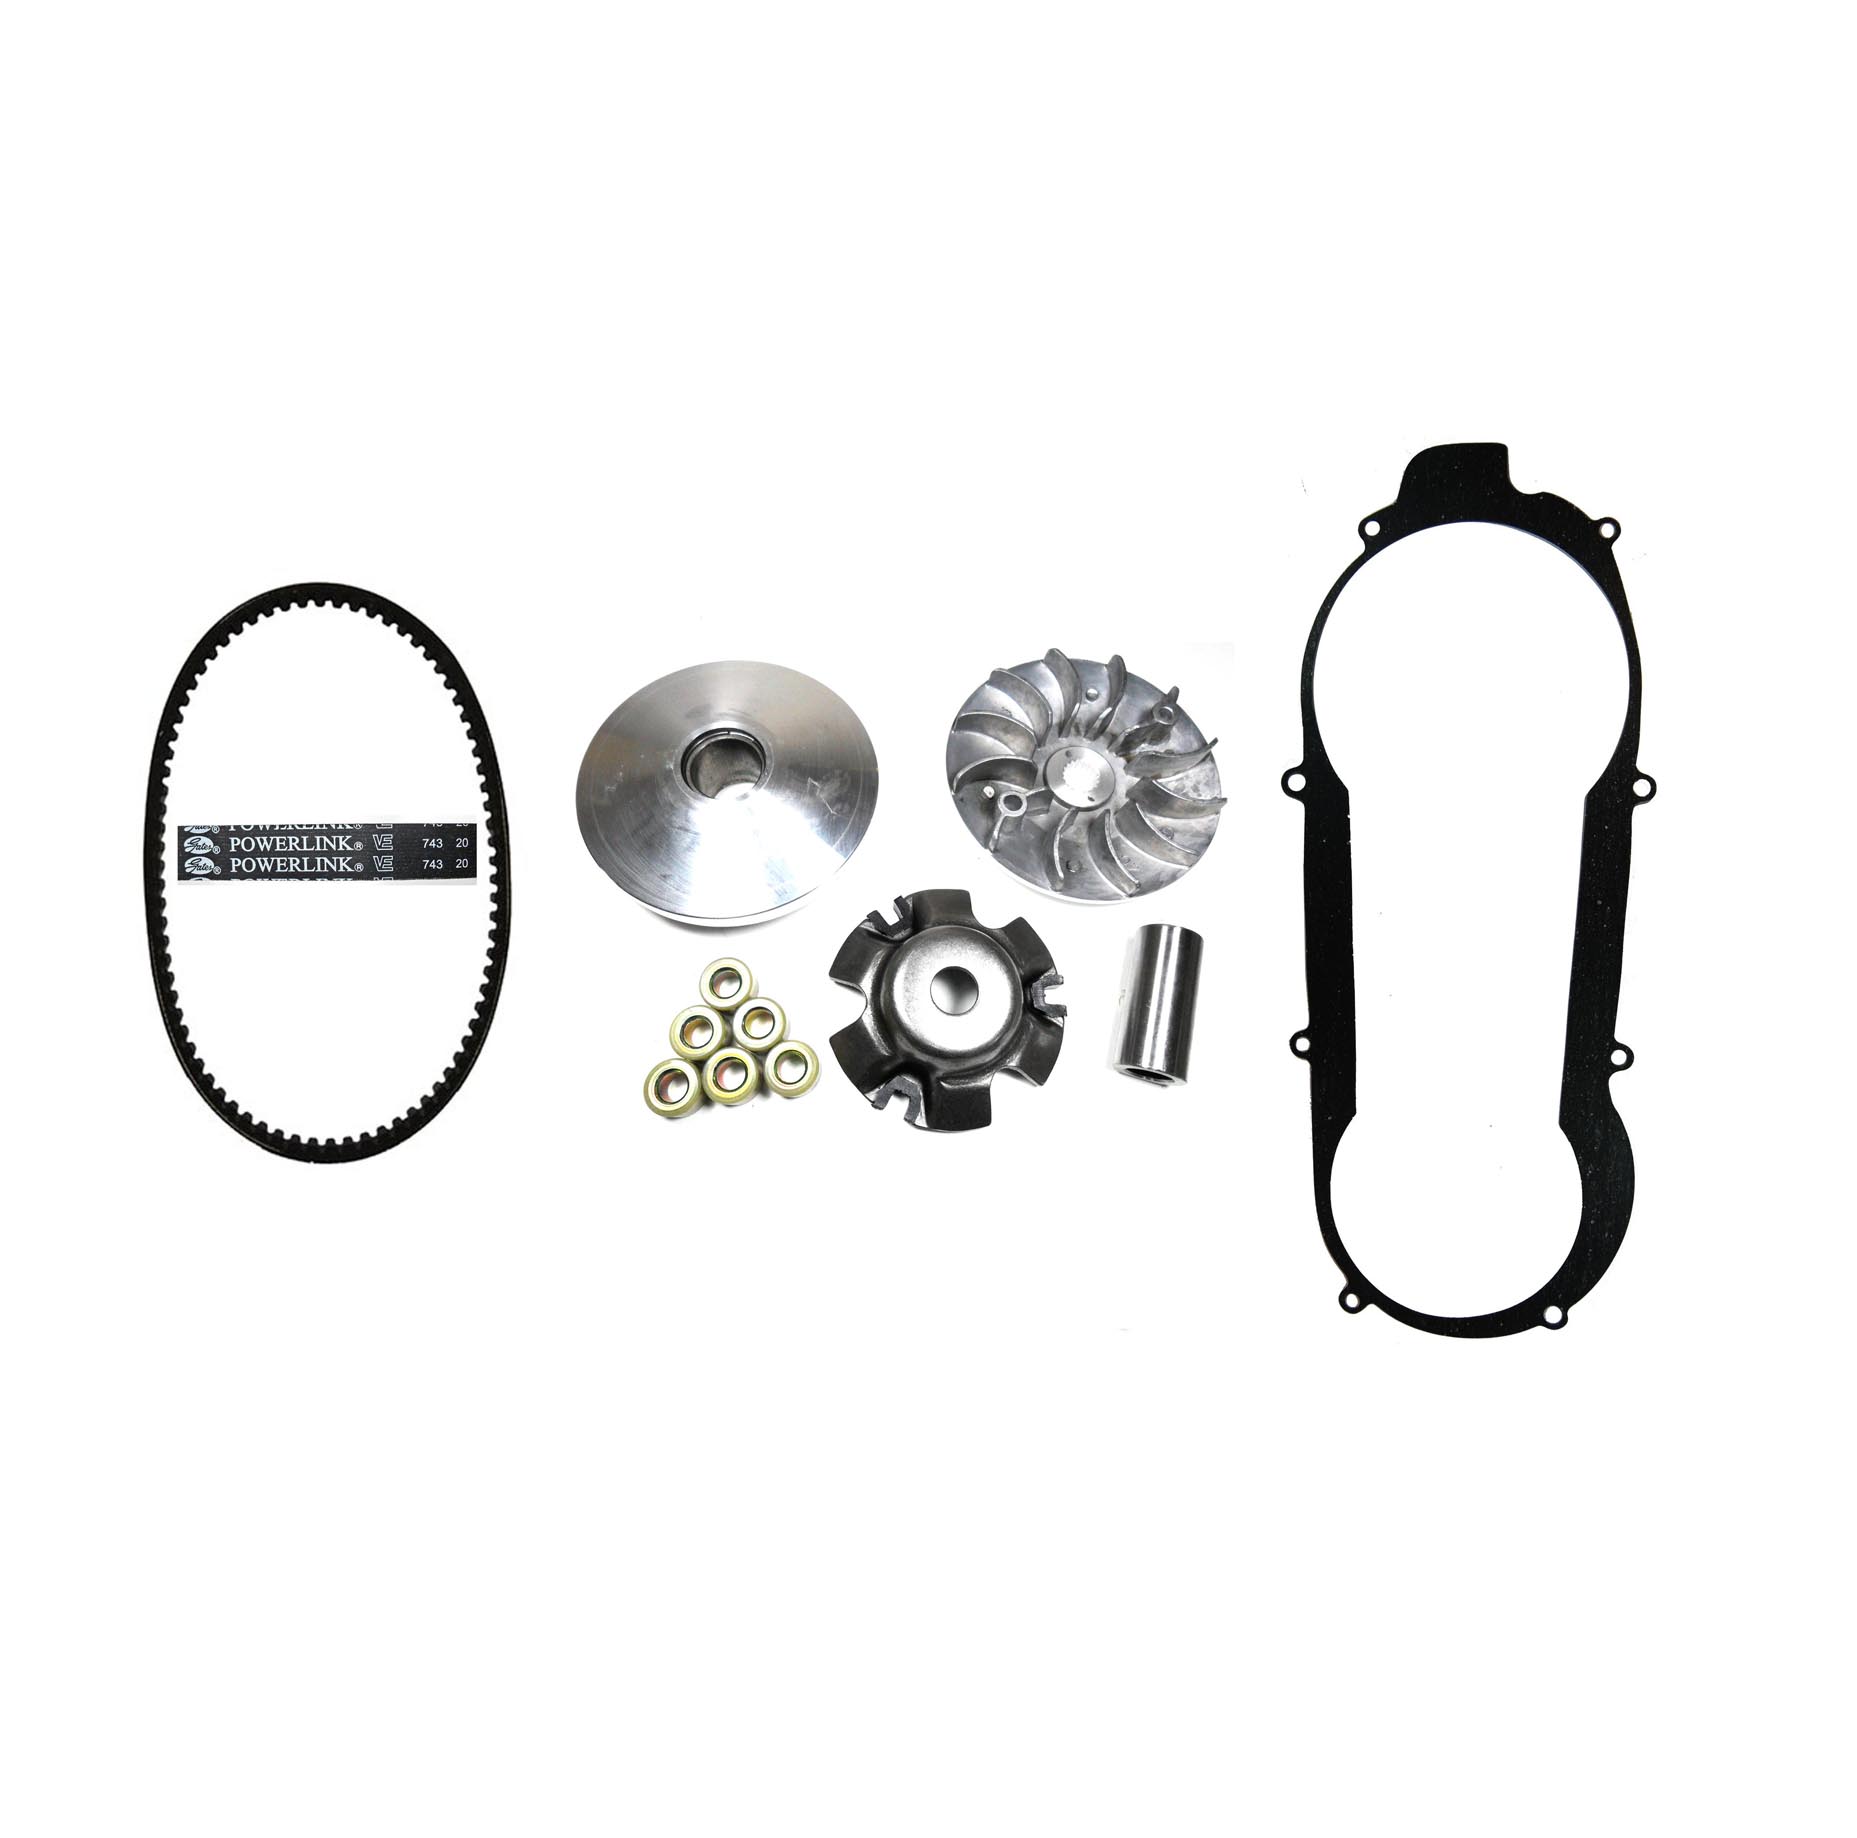 GY6-150 Front Clutch Variator & Powerlink Belt Kit (Short Case) For use on units with the 743x20x30 Belt